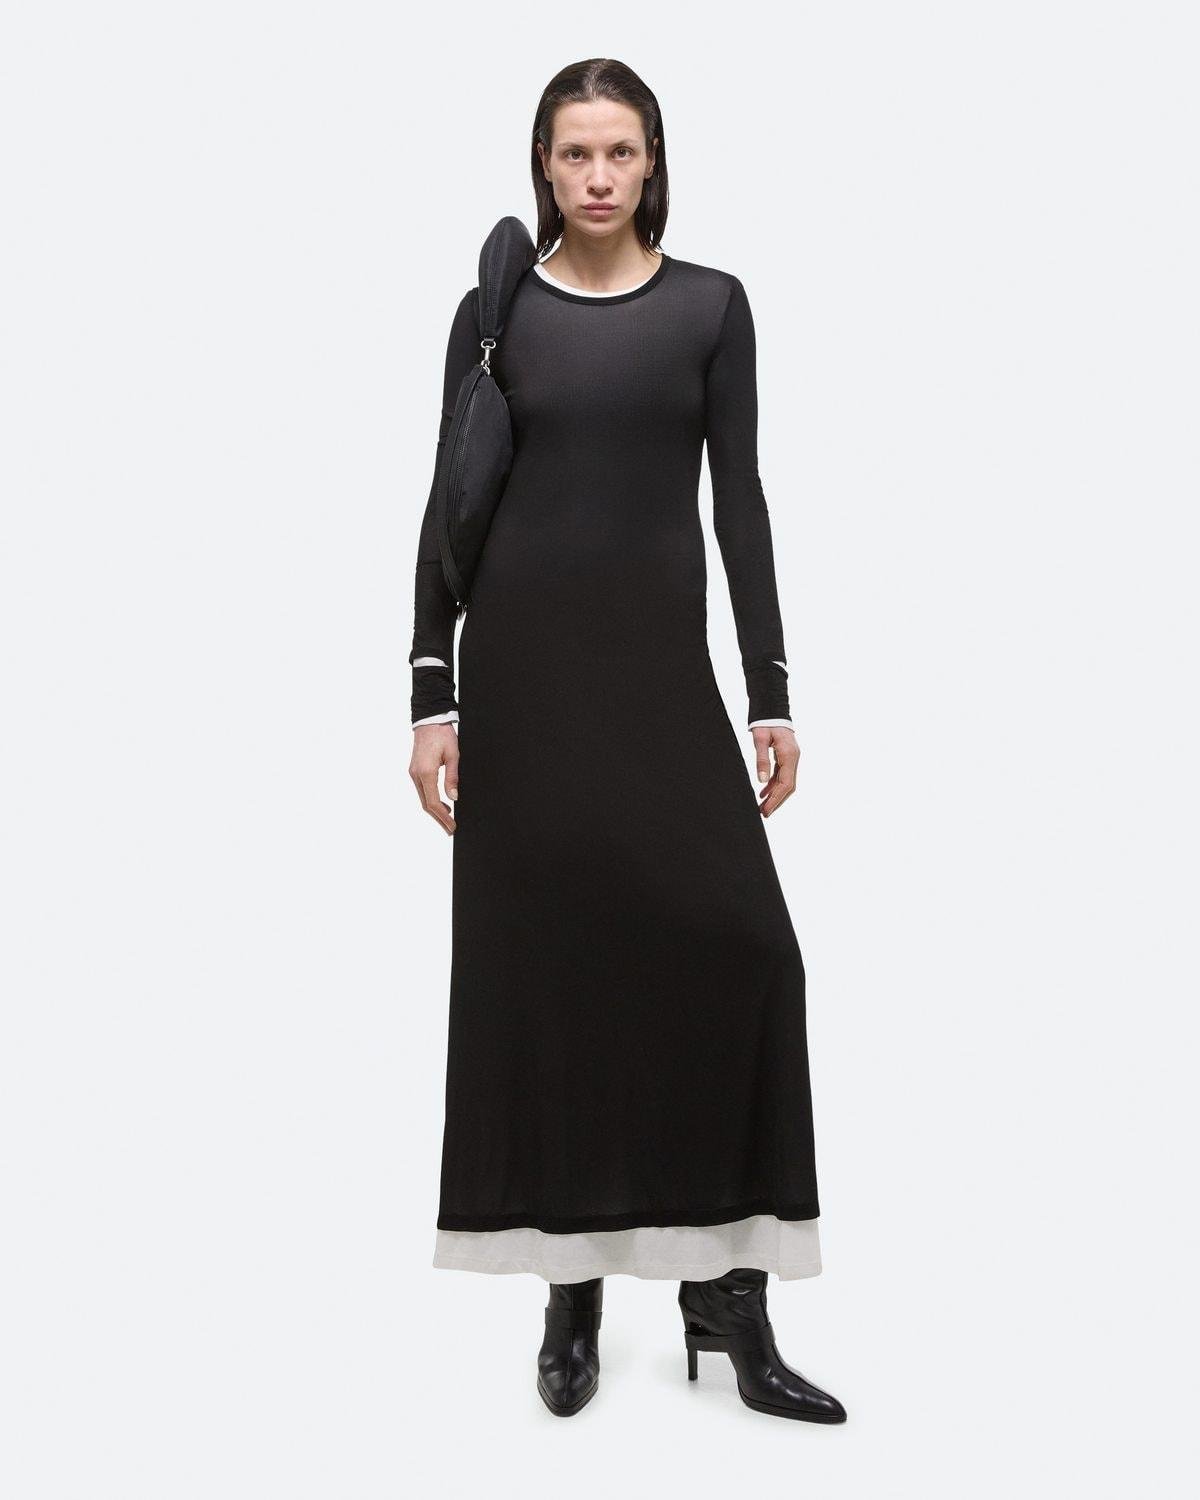 Double Layer Dress by HELMUT LANG